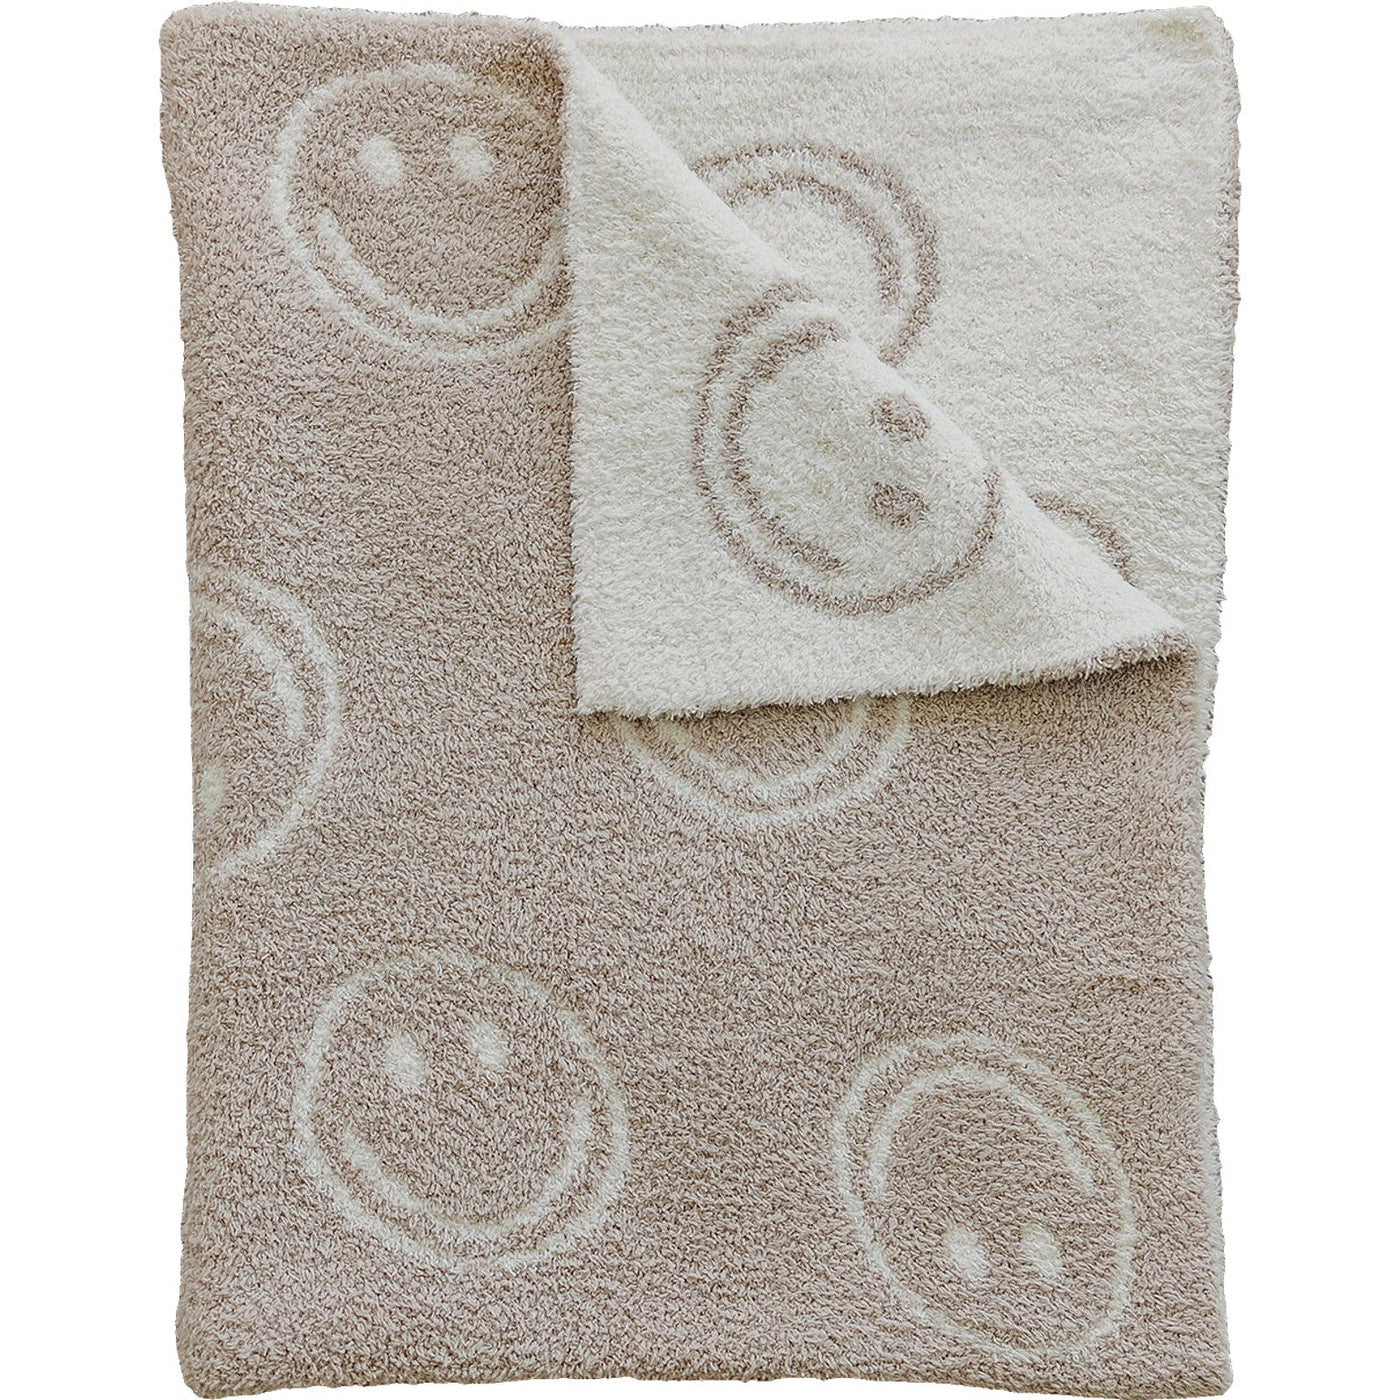 a blanket with a smiley face design